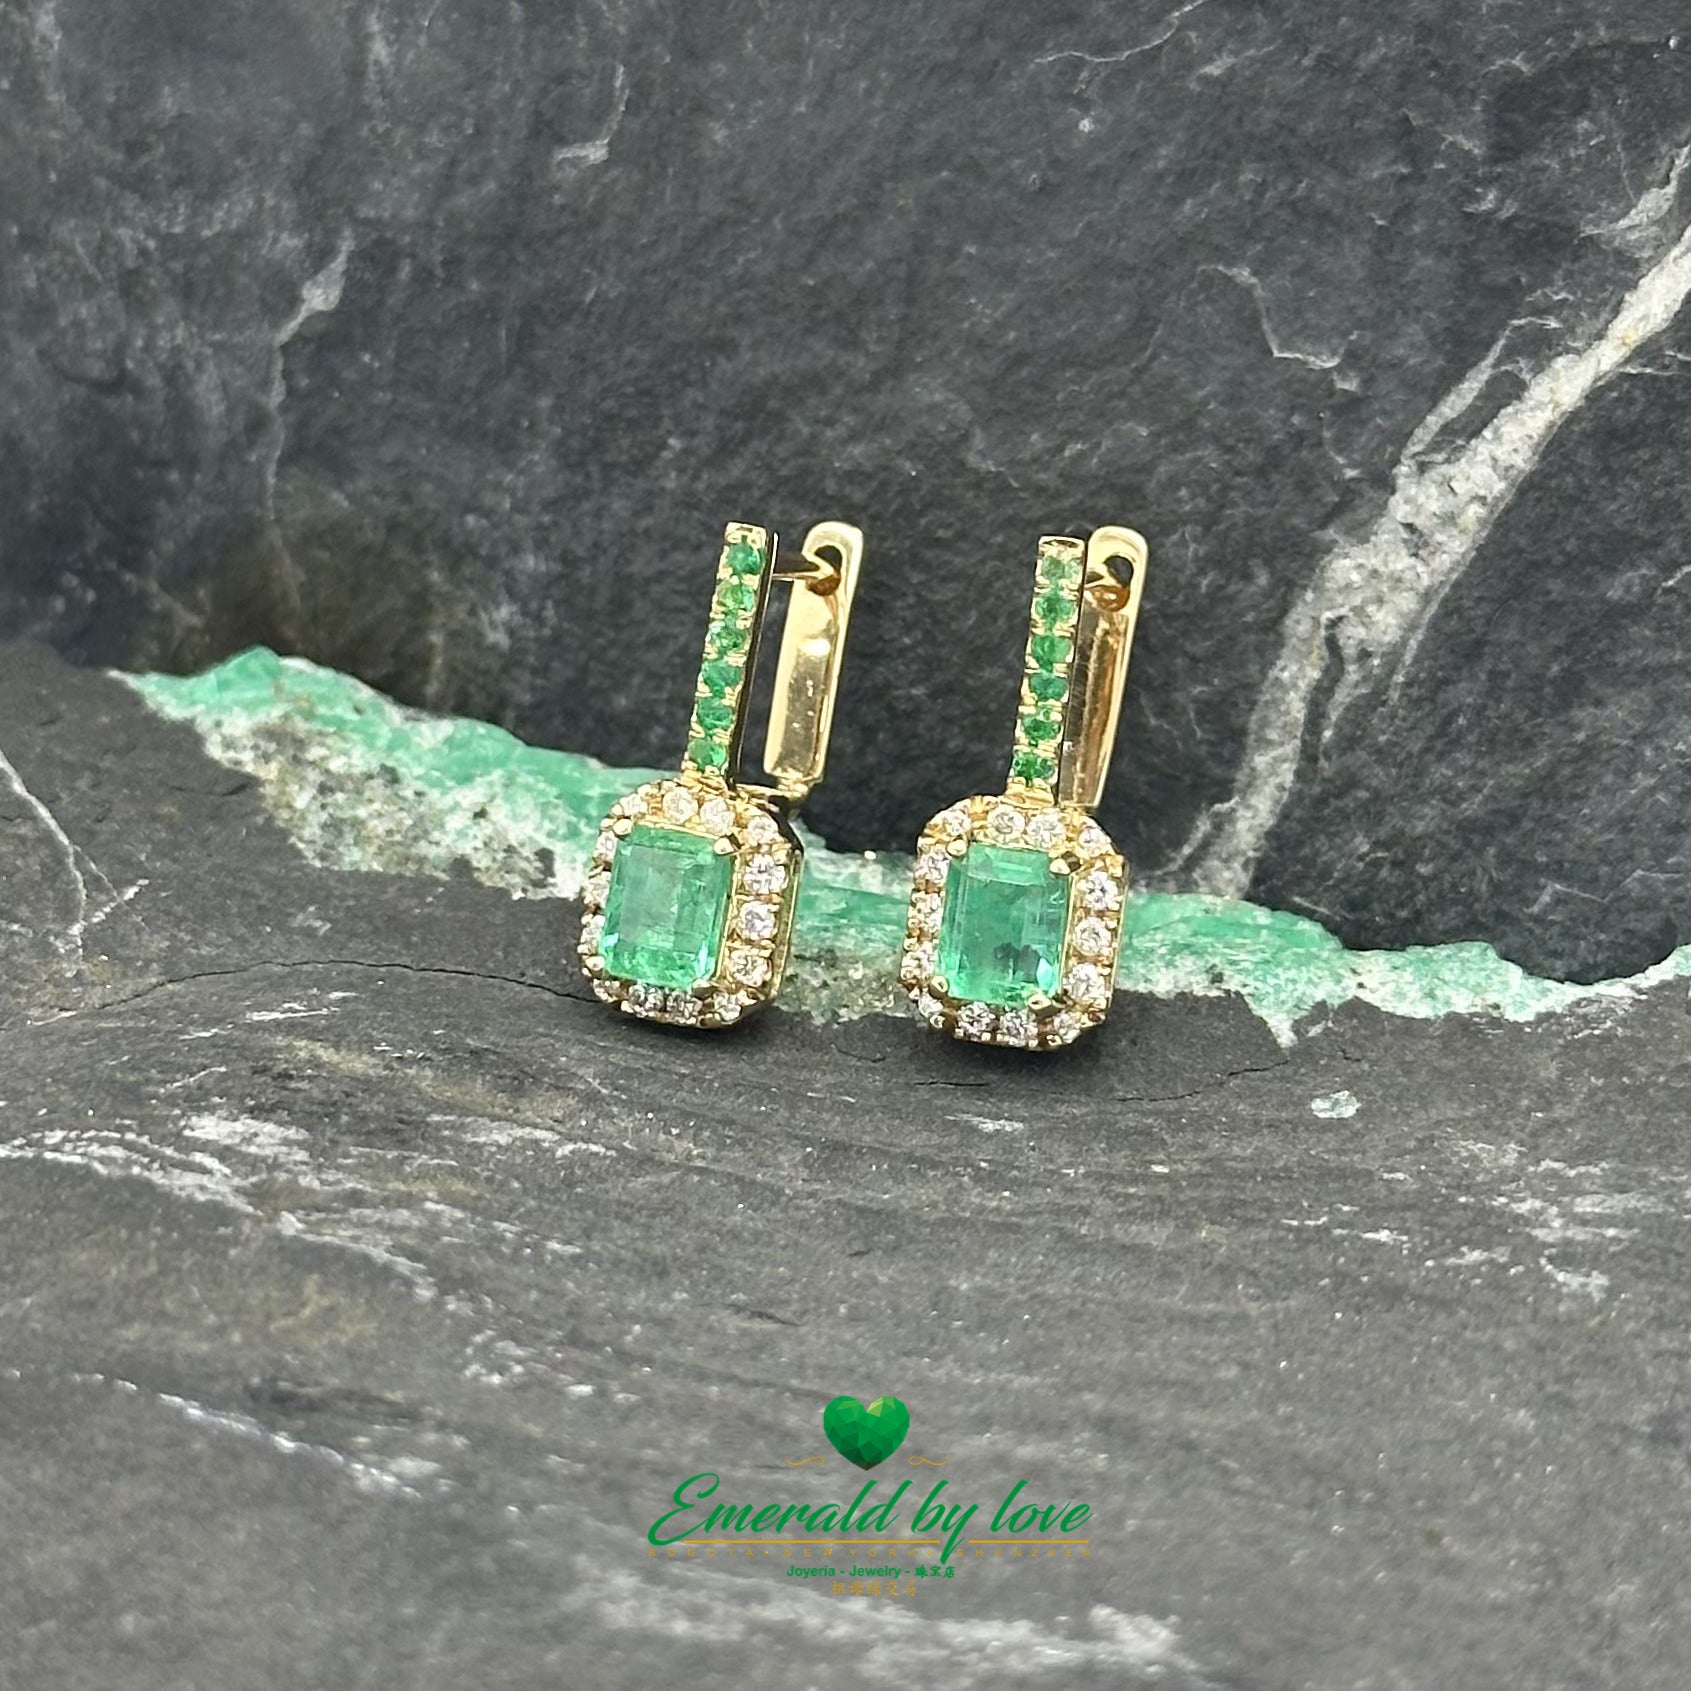 Yellow Gold Hoop Earrings with Emeralds and Marquise-cut Emerald Surrounded by Diamonds